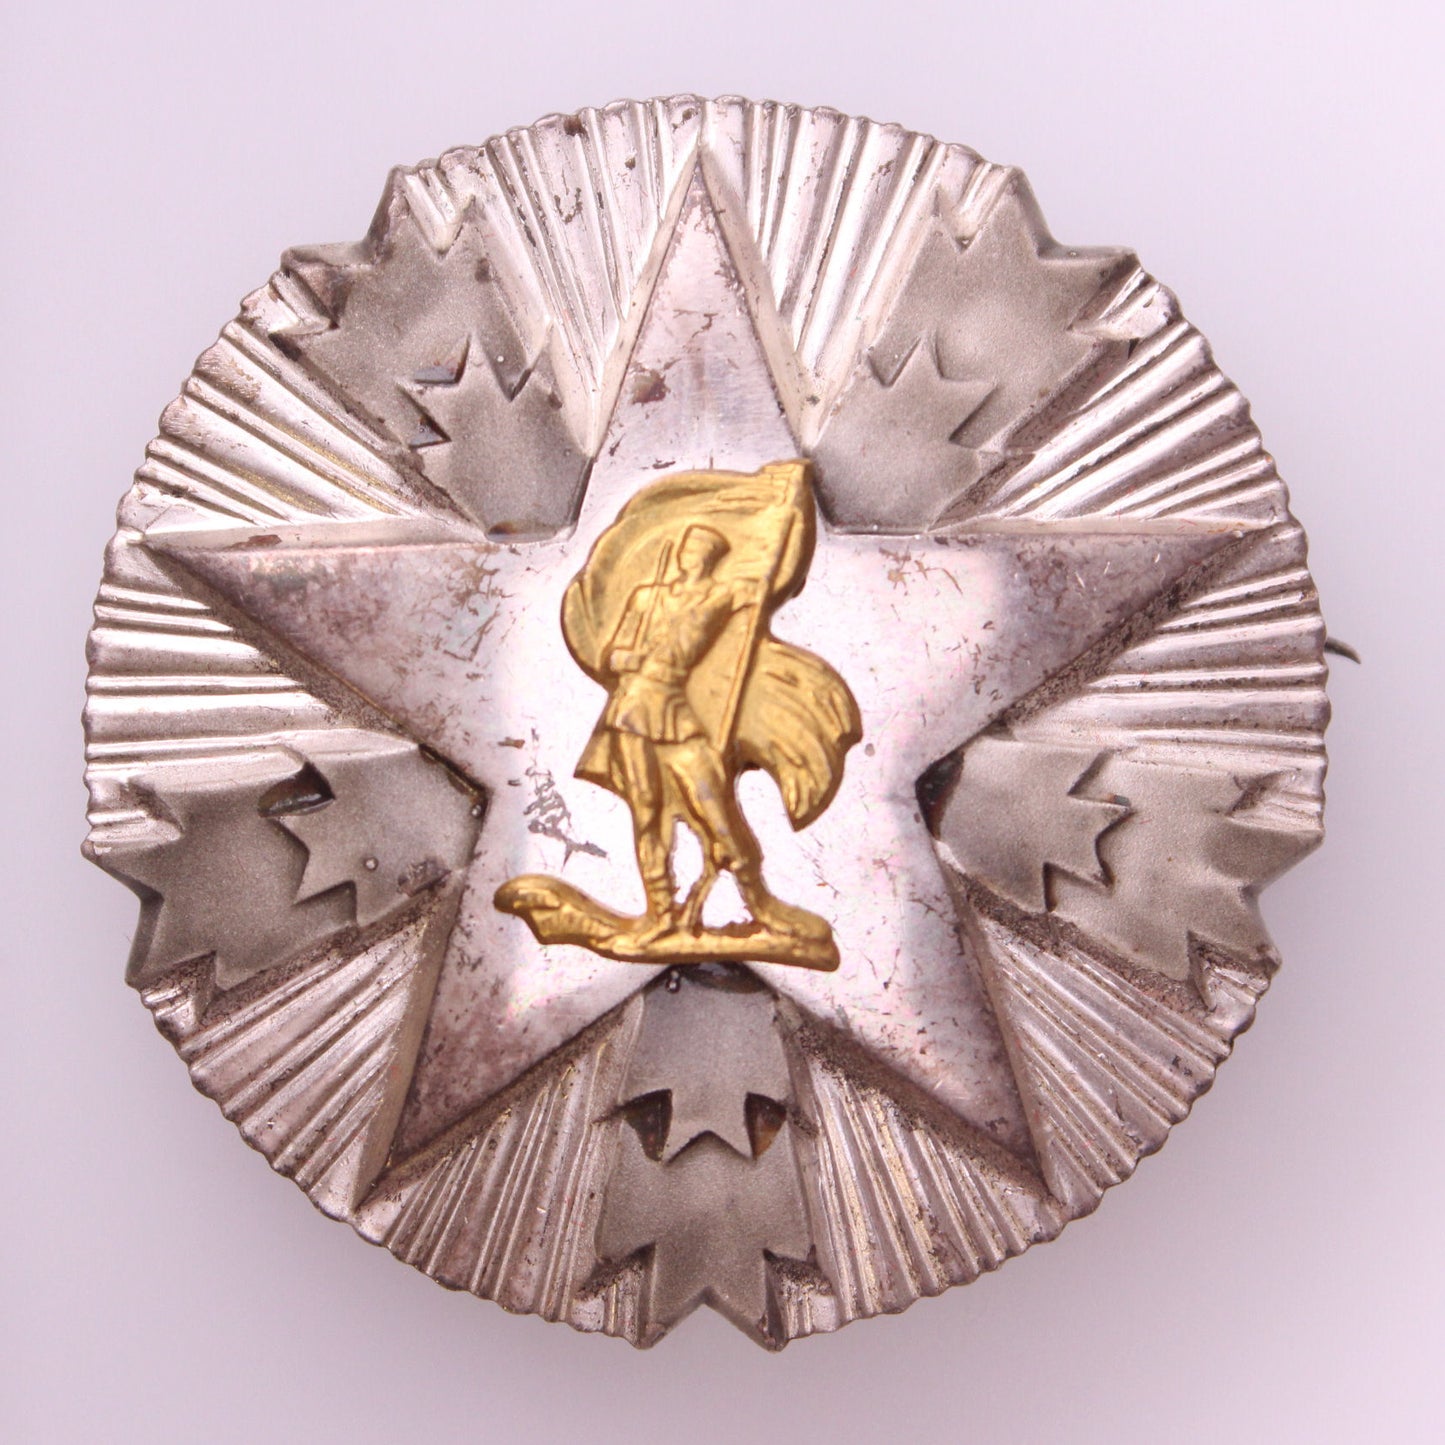 YUGOSLAVIA Order for the Merit for the People, 3rd class, horizontal pin